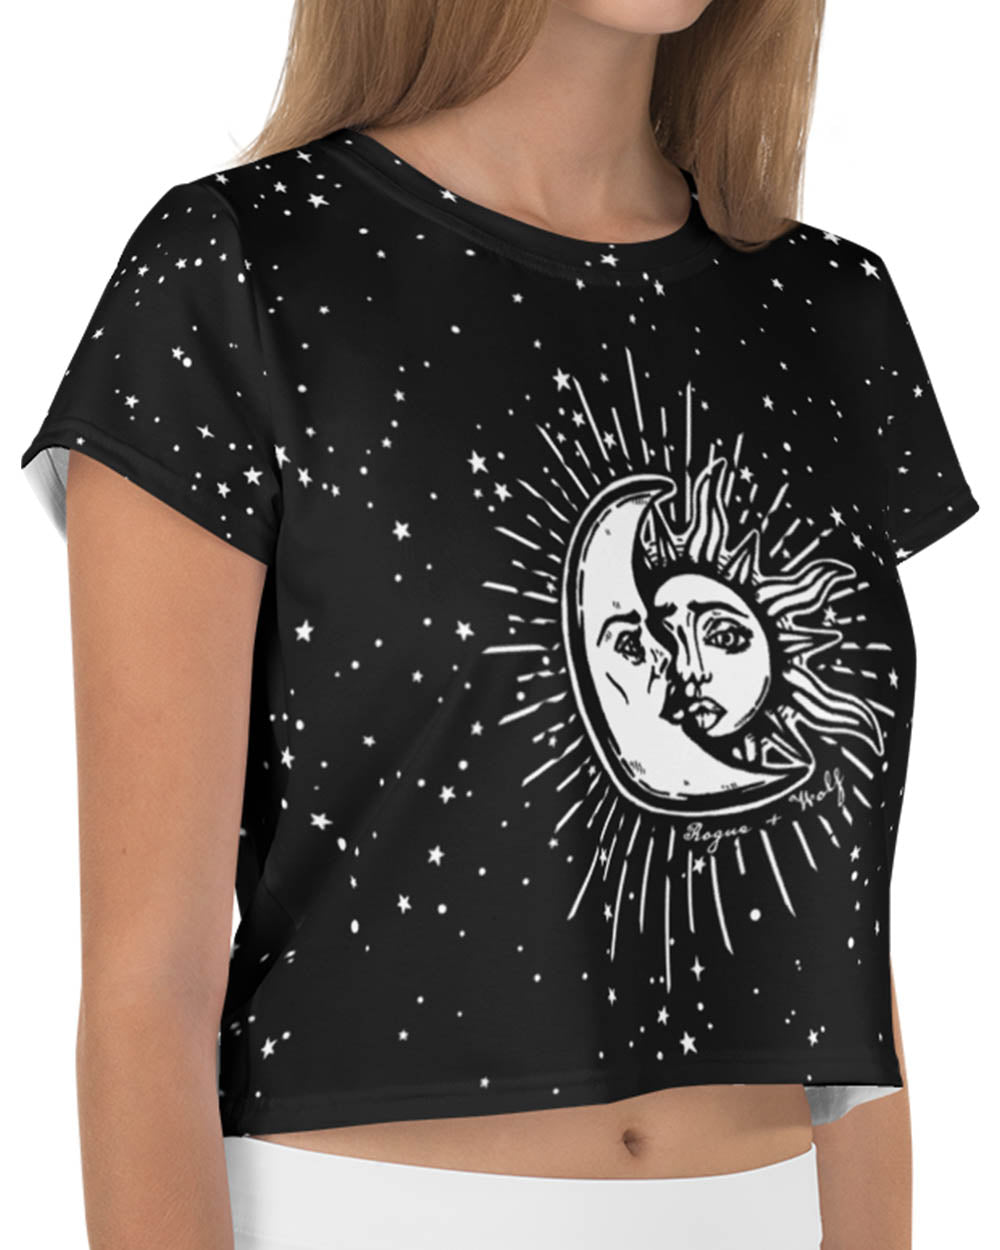 Astral Crop Top - Cute Black Witchy Alt Style Gothic Grunge Aesthetic Dark Academia Pagan Halloween Gothic Style